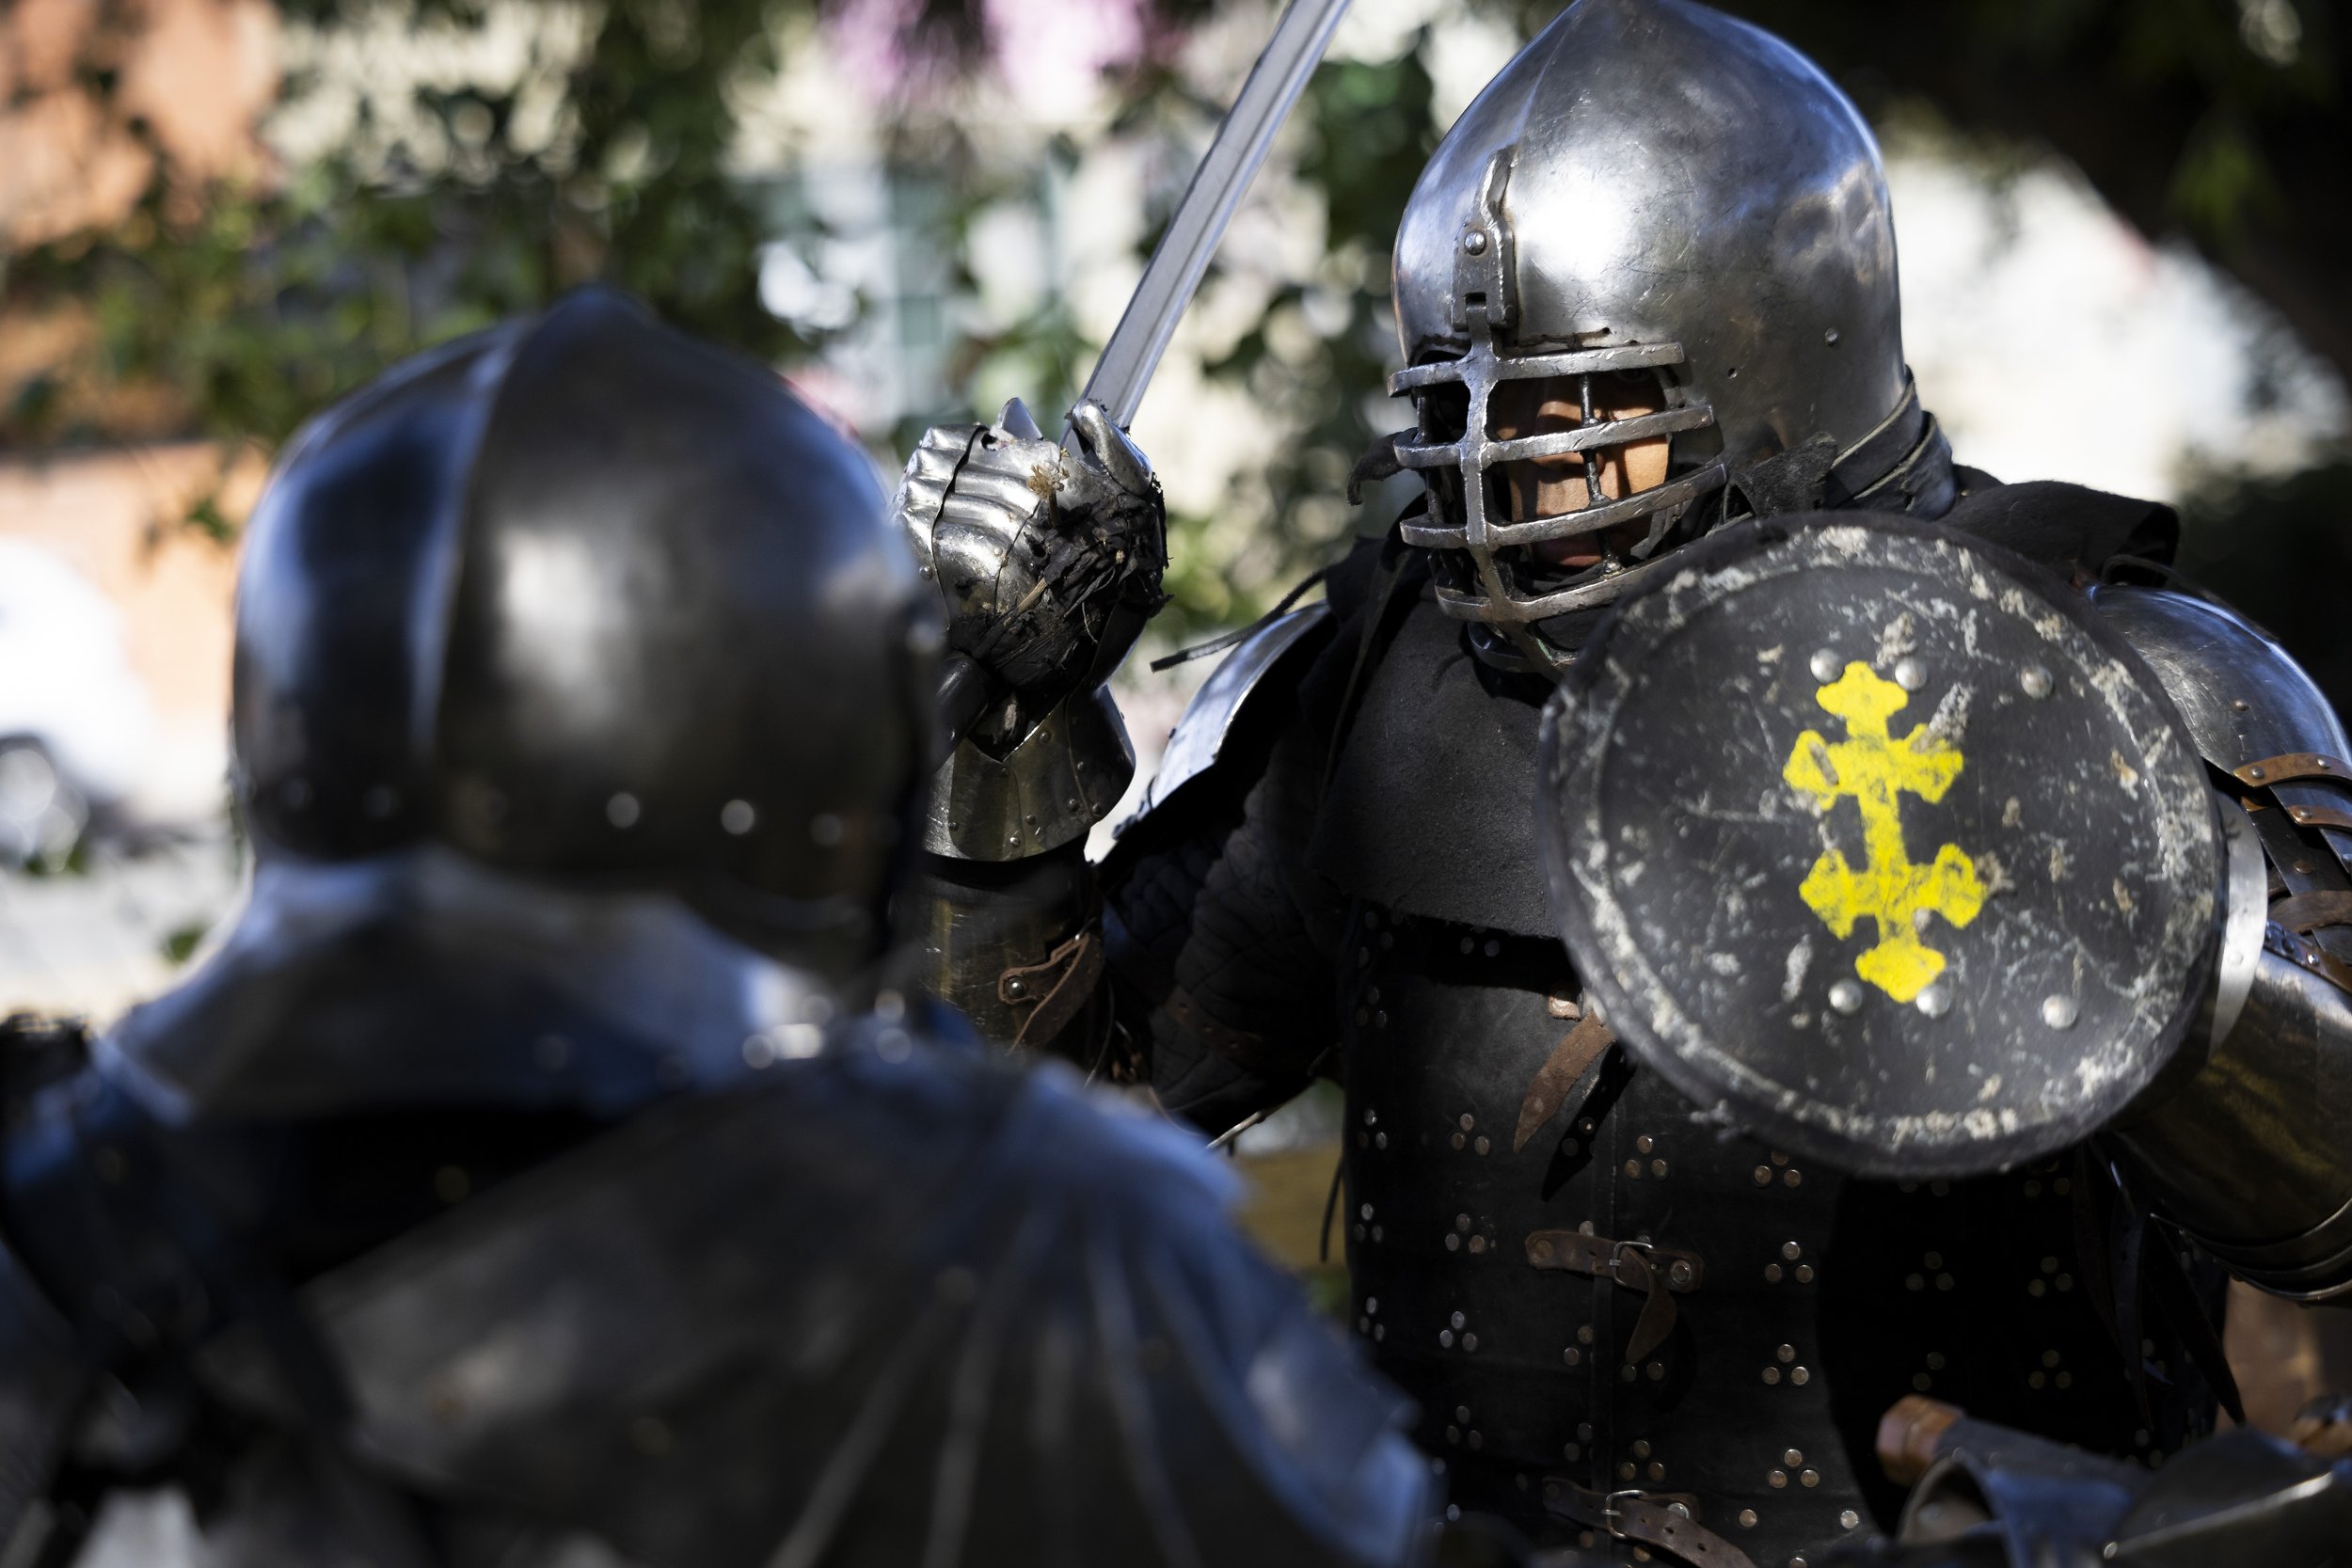  Members of the Los Angeles Golden Knights, a buhurt team, fight during a practice match at Culver City Park in Culver City, Calif., on Saturday, Dec. 9, 2023. Buhurt, otherwise known as armored combat, is a full contact fighting sport which fighters